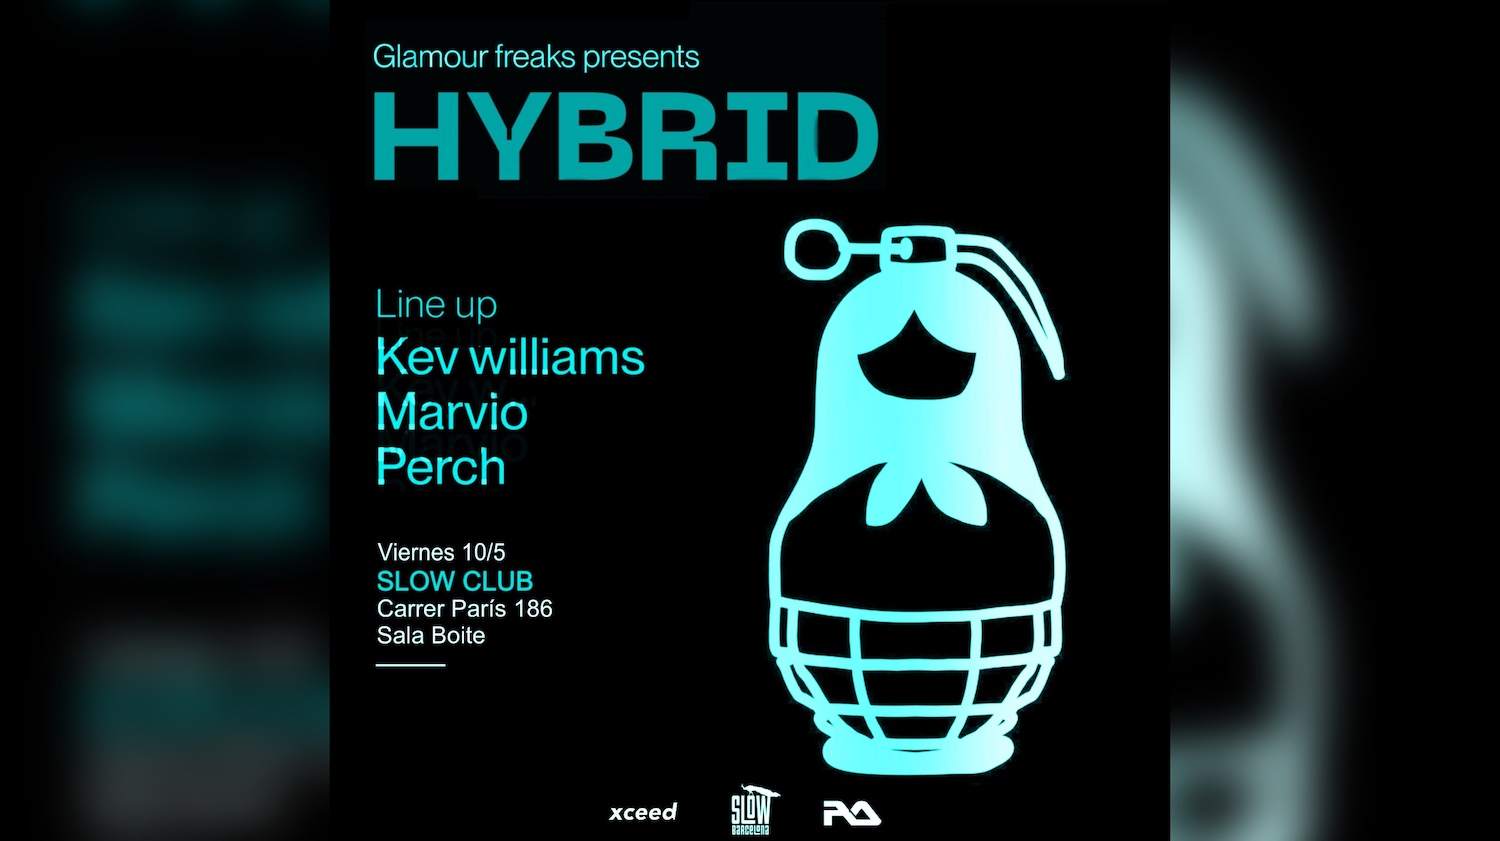 Glamour Freaks presents Hybrid Party (Candy Box room) - Página frontal